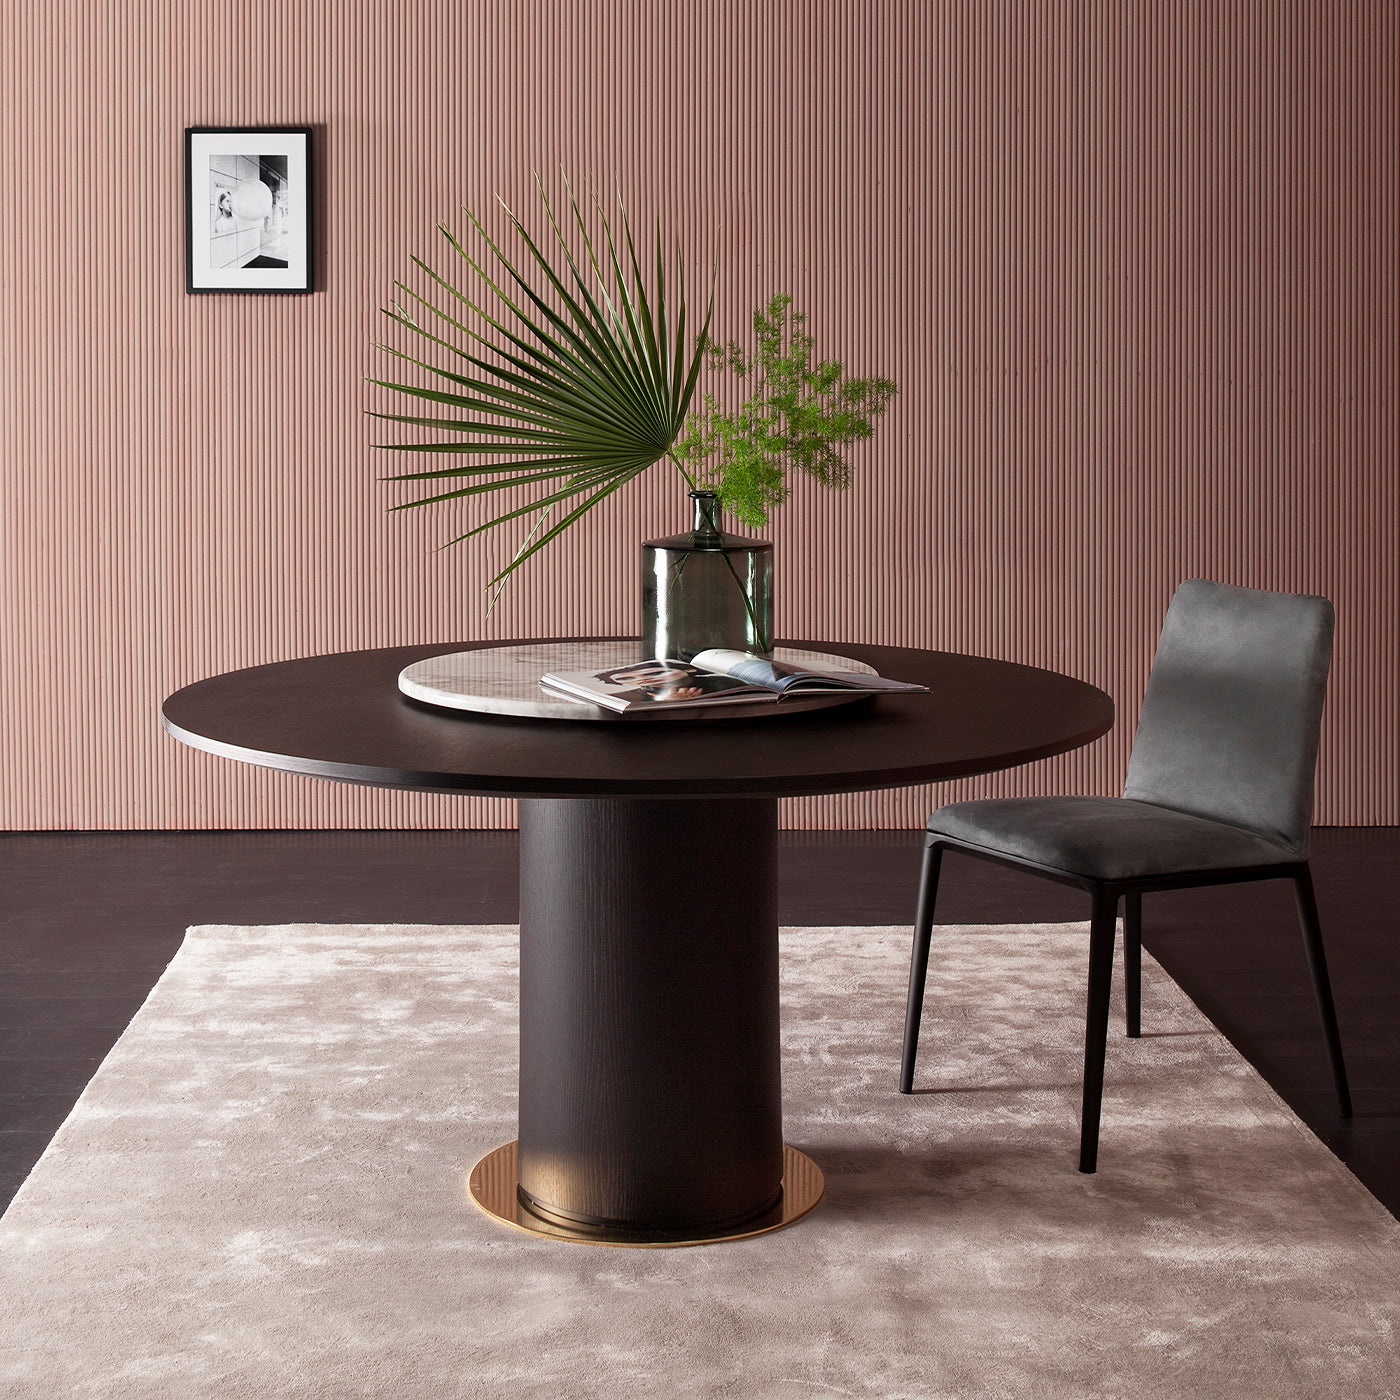 Circle Dining Table with Lazy Susan by Gianluigi Landoni - Alternative view 1